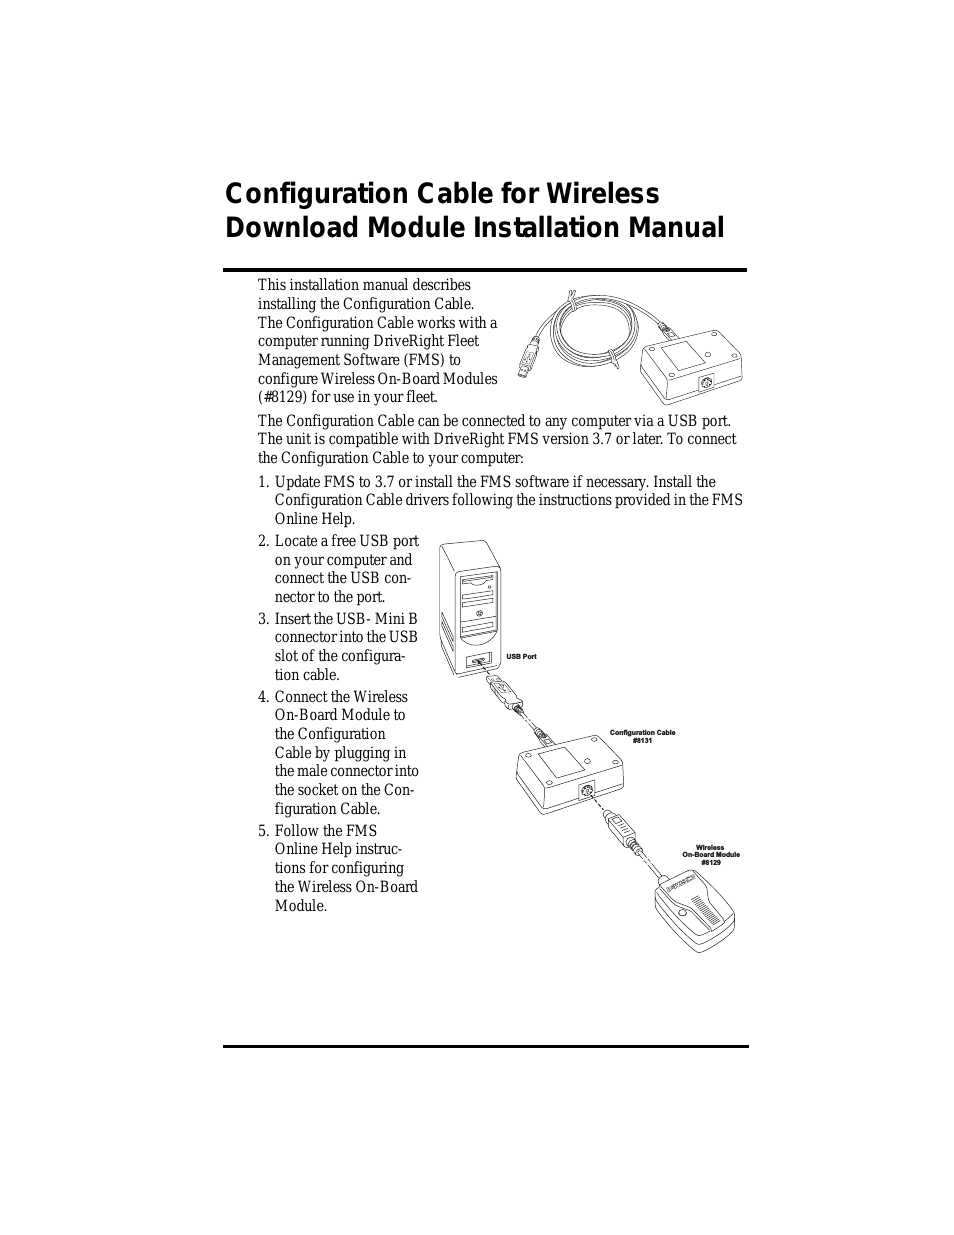 Config. Cable for Wireless On-Board Manual (8131)